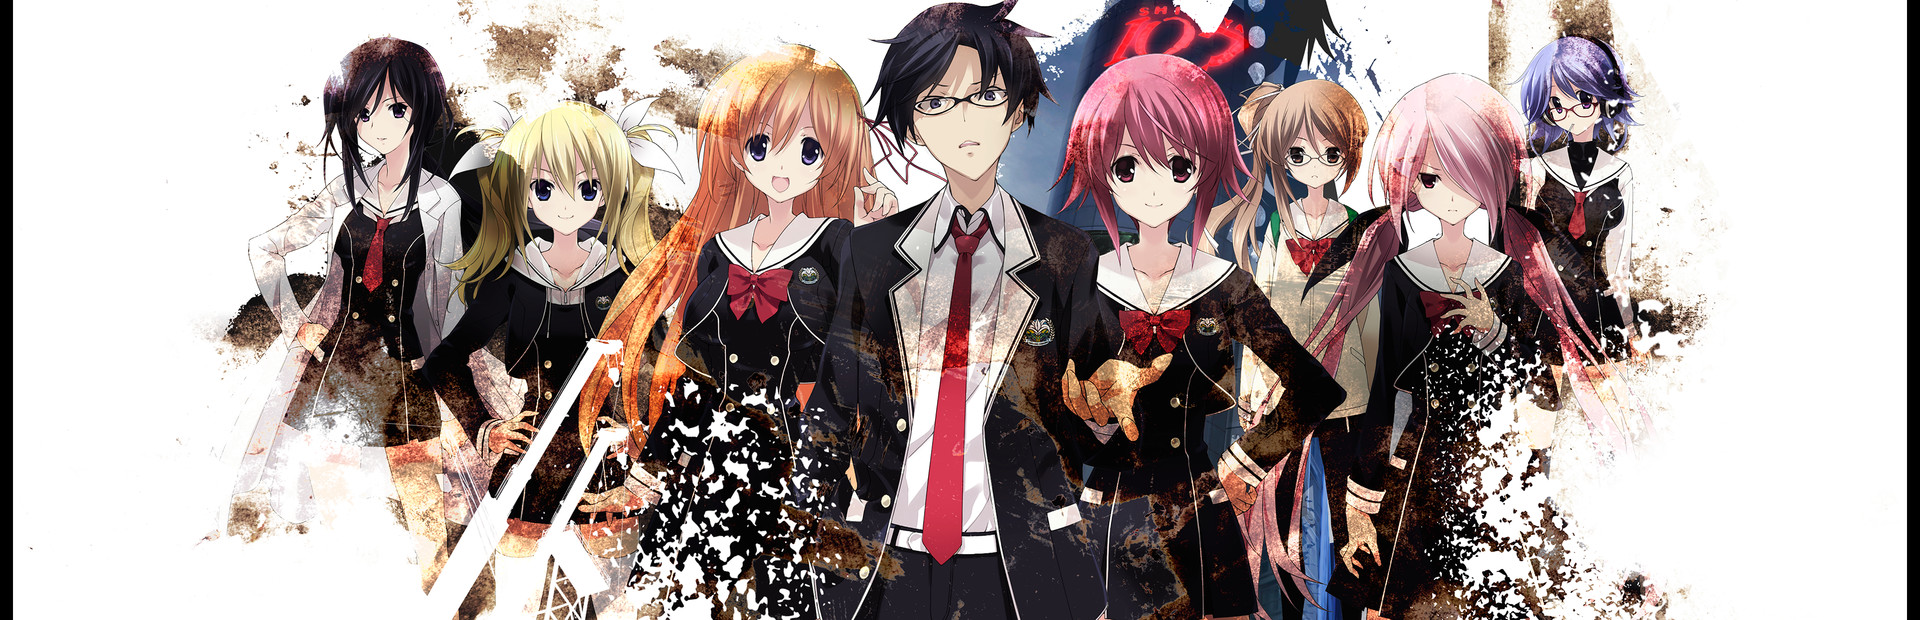 CHAOS;CHILD cover image